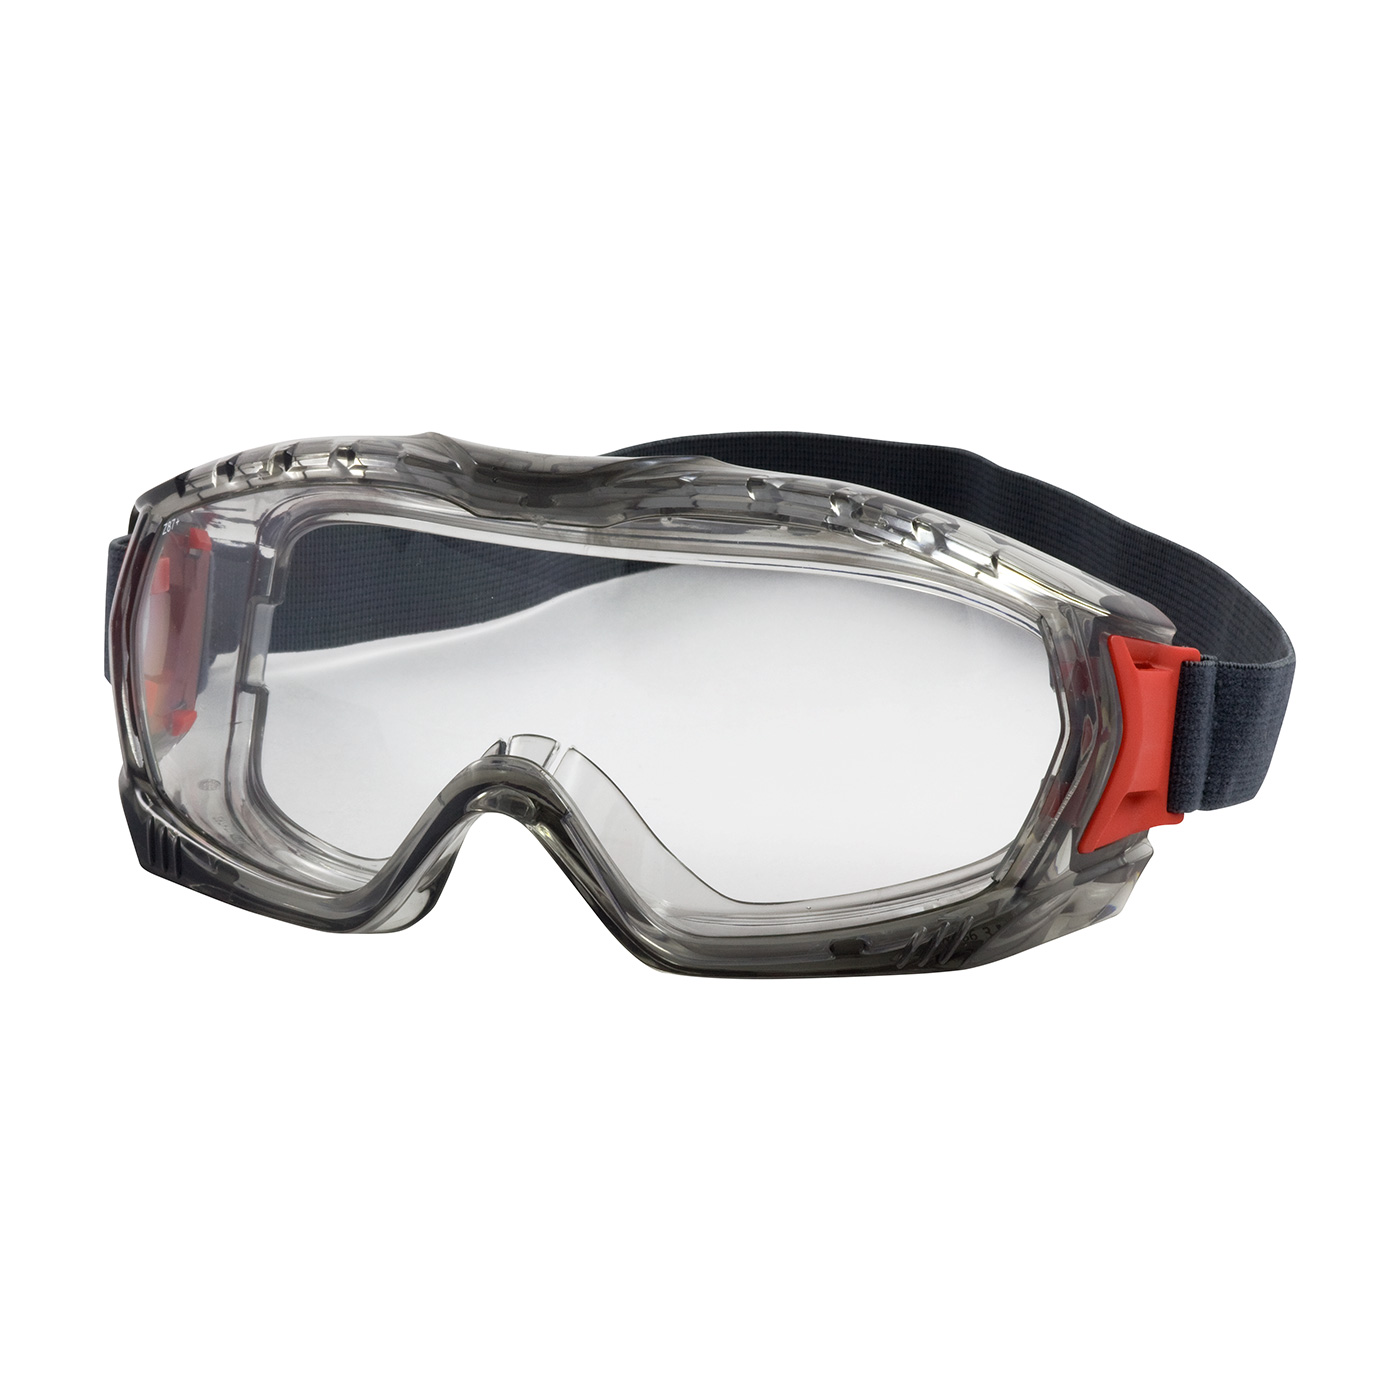 PIP 251-60-0020 Stone Indirect Vent Goggle with Gray Body, Clear Lens and Anti-Scratch/FogLess 3Sixty Coating PID-251600020